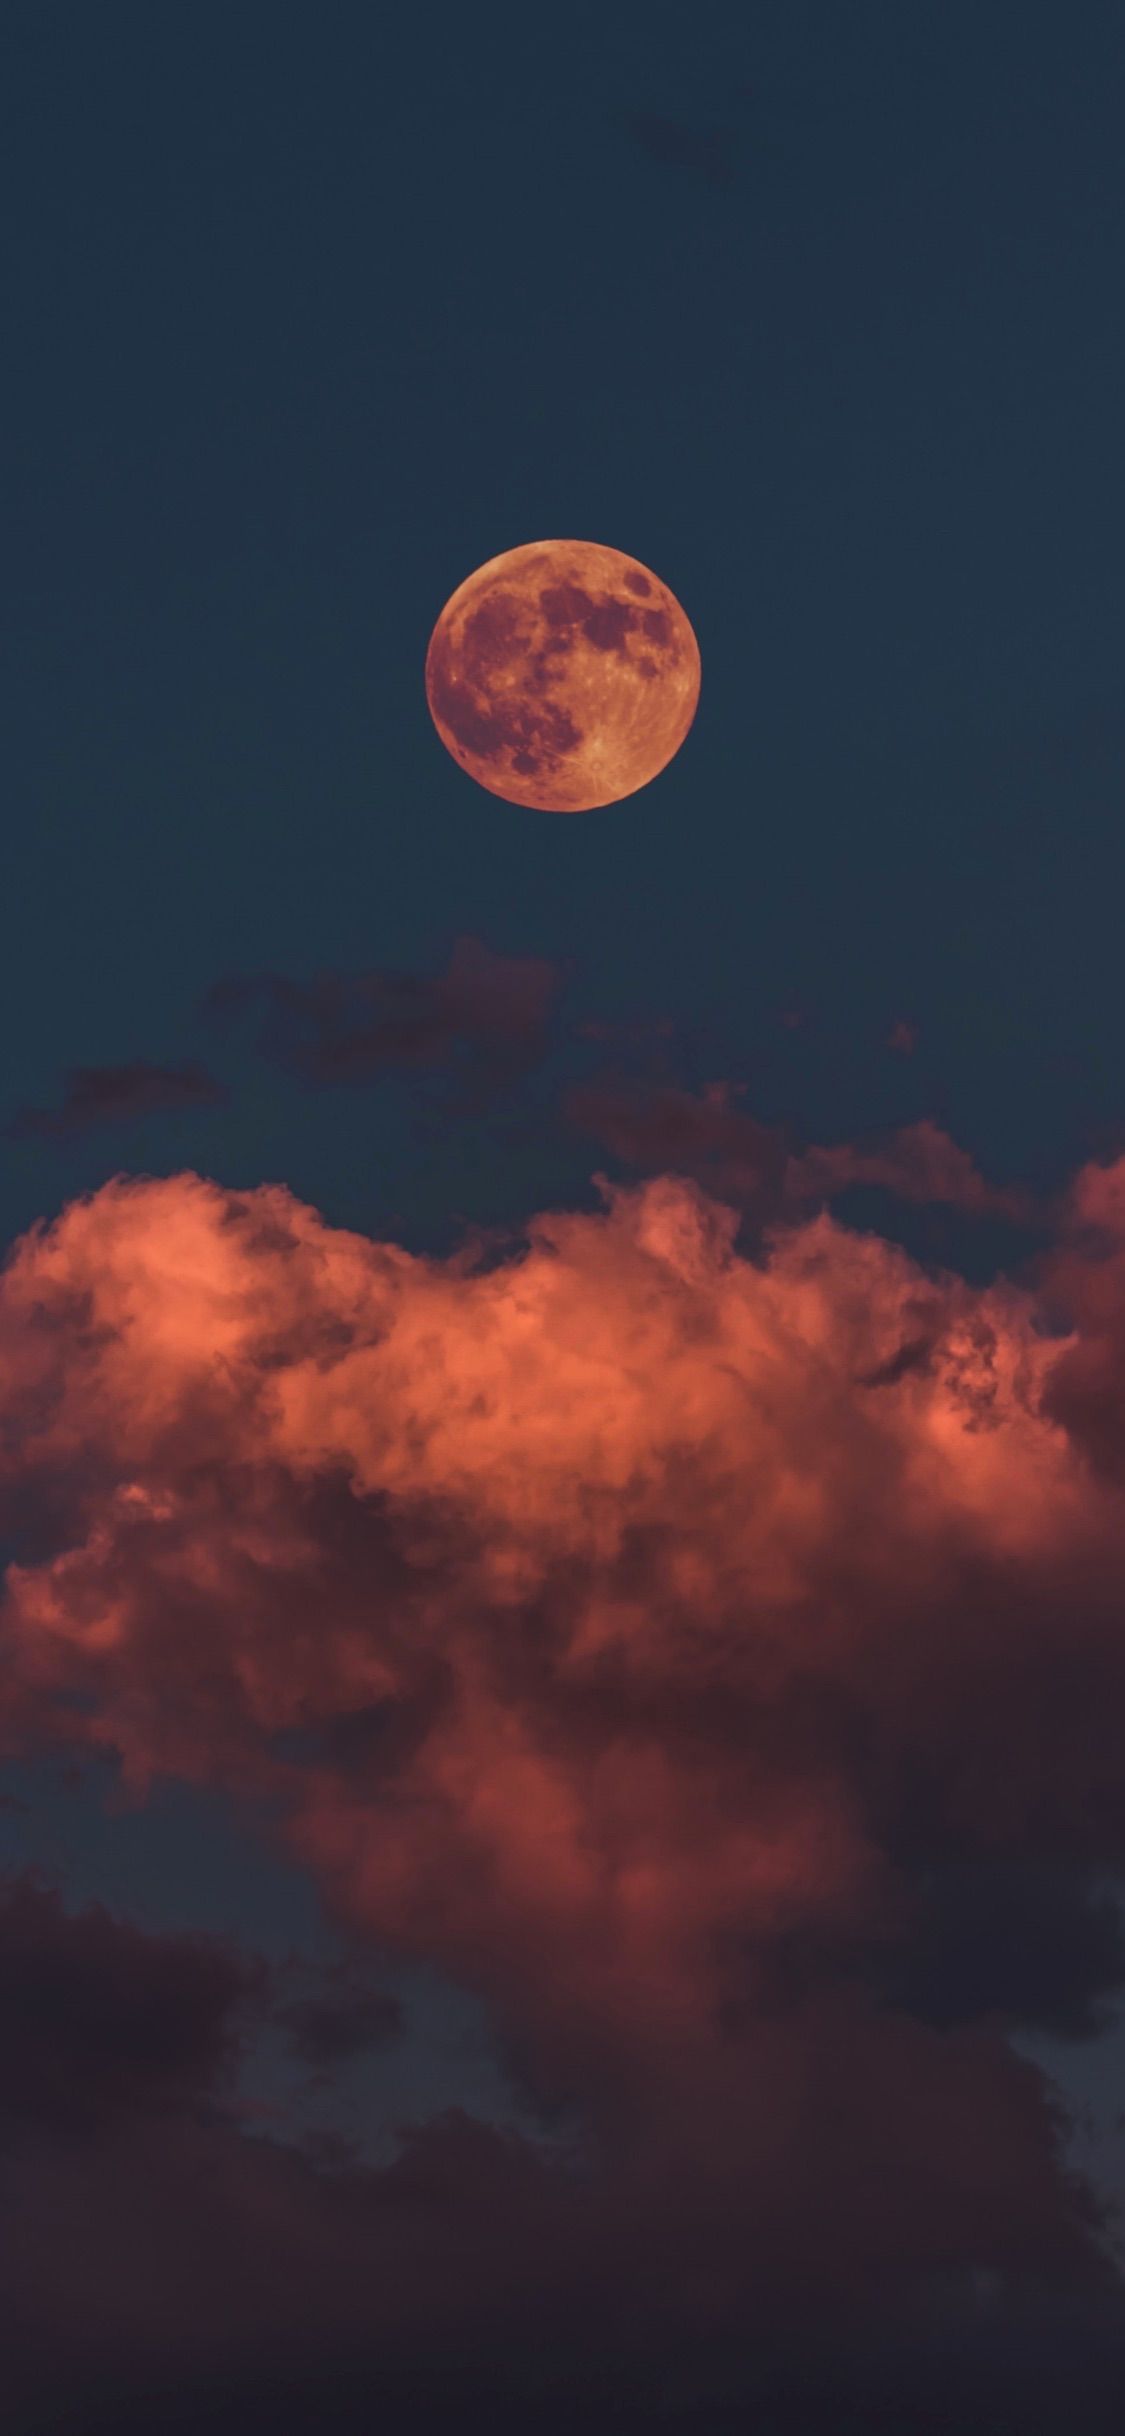 Wallpaper Weekends: 'For All Mankind' Inspired Moon iPhone Wallpaper